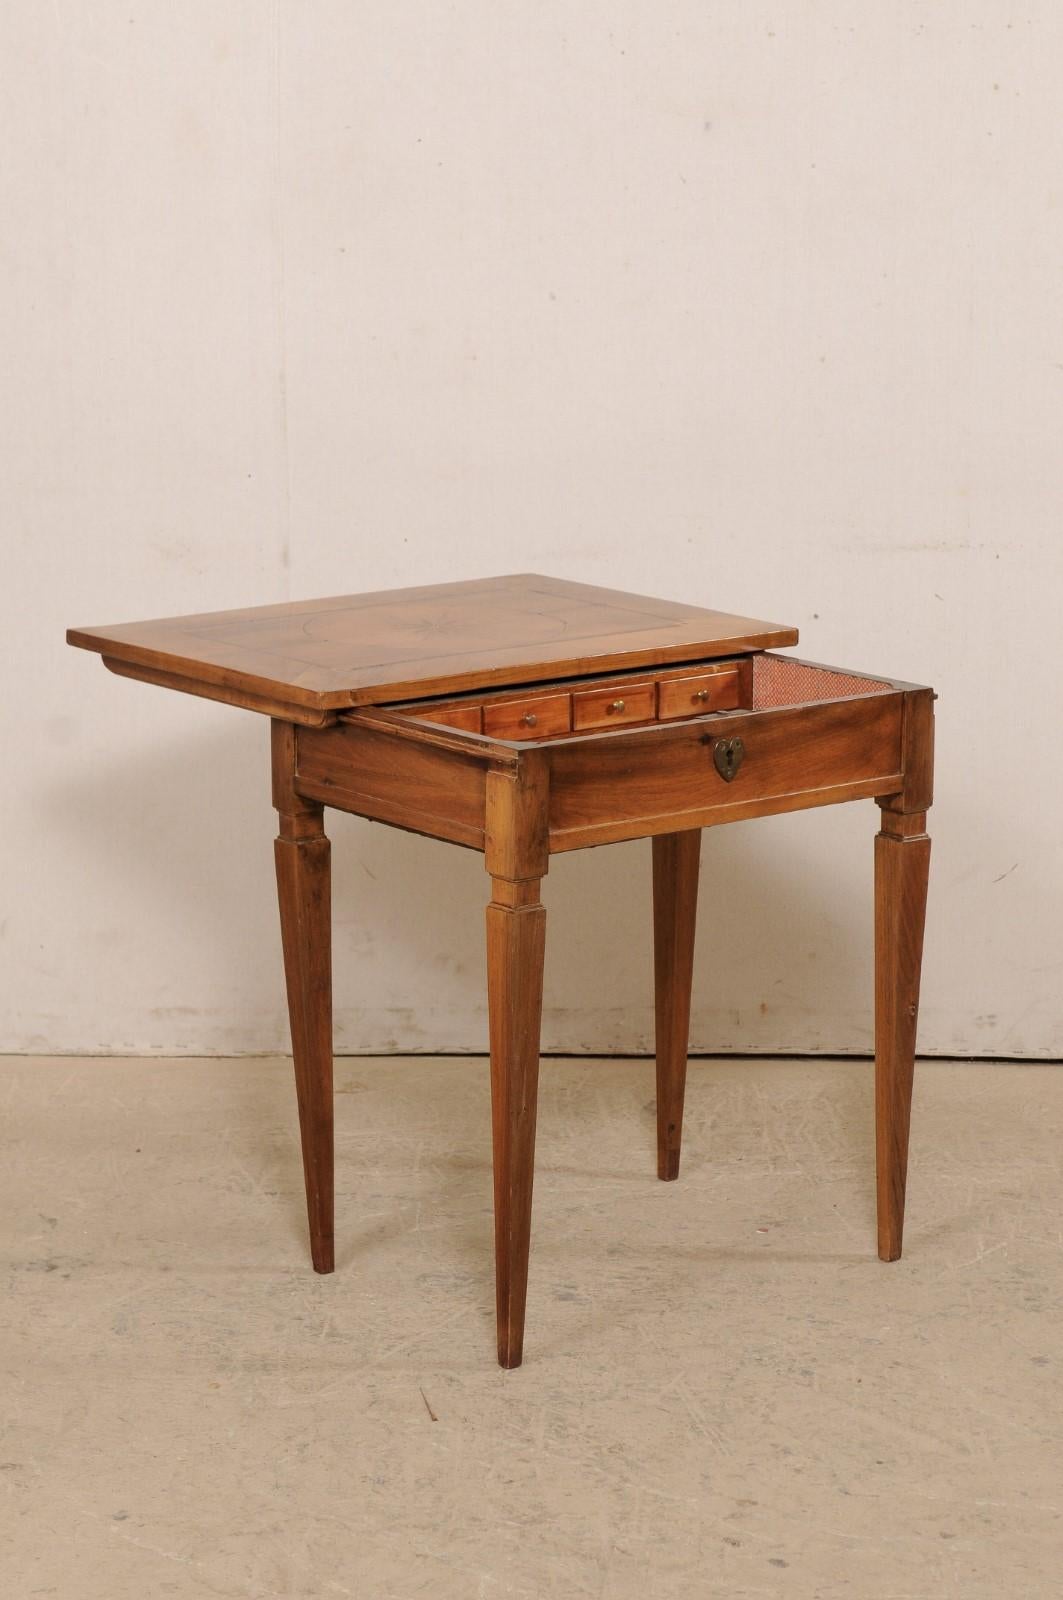 Fruitwood 19th C. Italian Writing Desk w/Decorative Inlay & Sliding Top for Hidden Storage For Sale